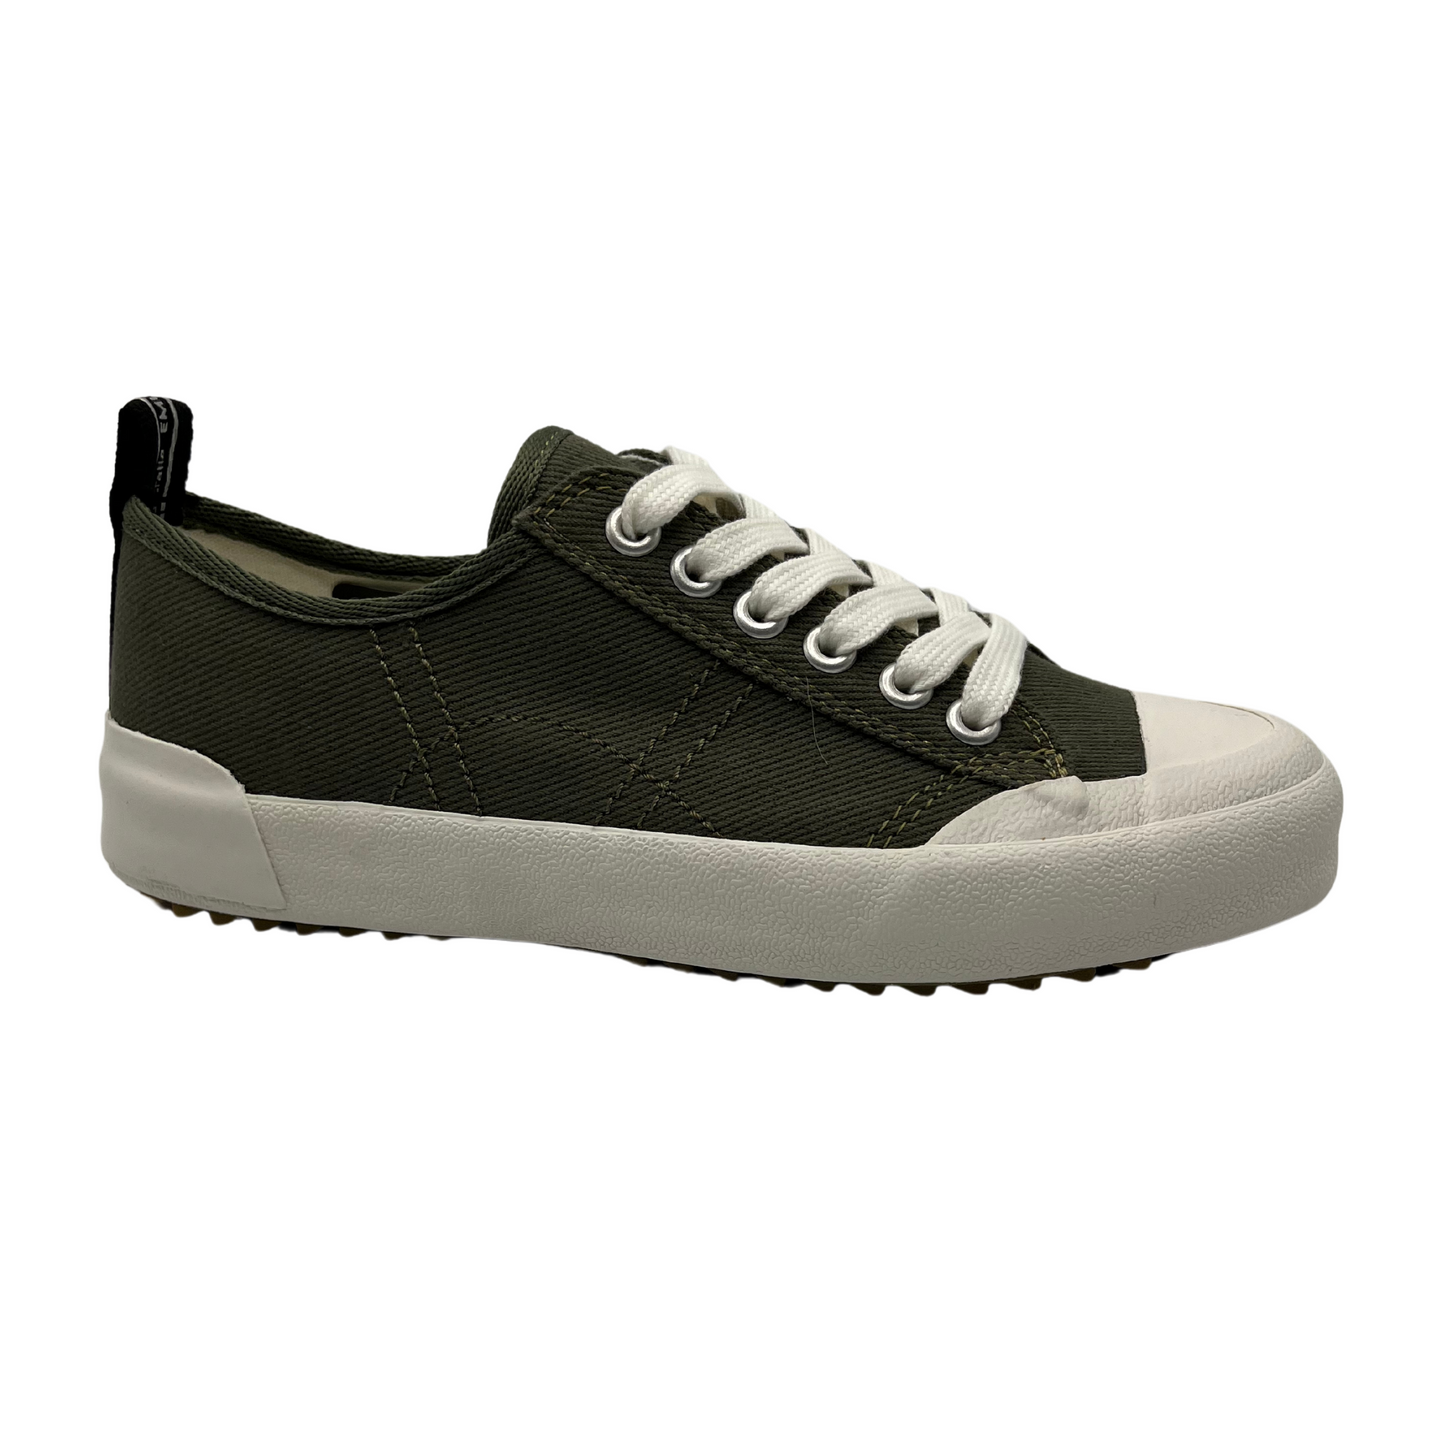 Right facing view of green cotton sneaker with white rubber outsole and matching laces